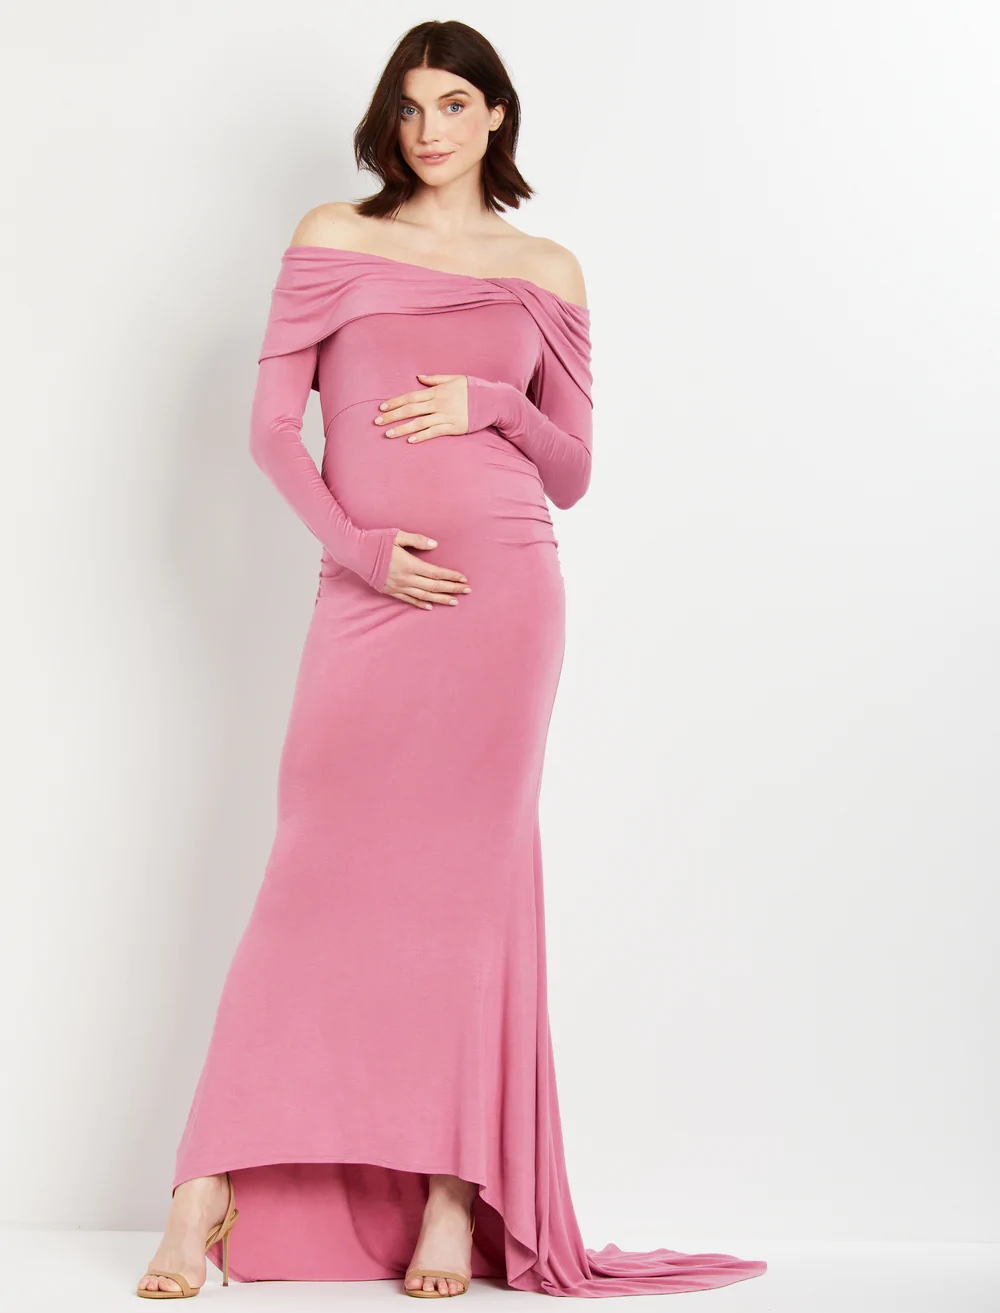 23 Best Maternity Photoshoot Dresses in 2022 | Well+Good